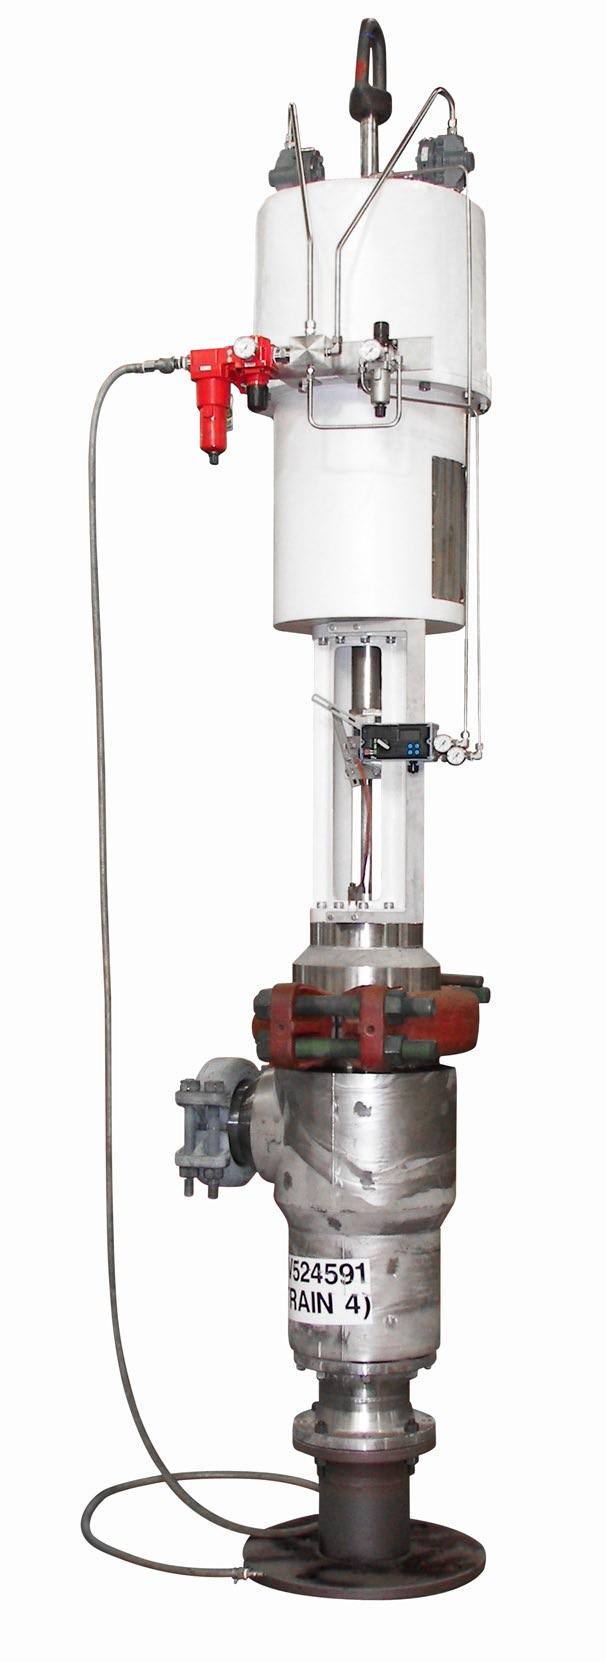 09 SERIES C SPRING-RETURN PNEUMATICALLY OPERATED PISTON ACTUATORS Designed without linkages and with minimal working parts, this actuator offers built-in reliability and low maintenance costs.